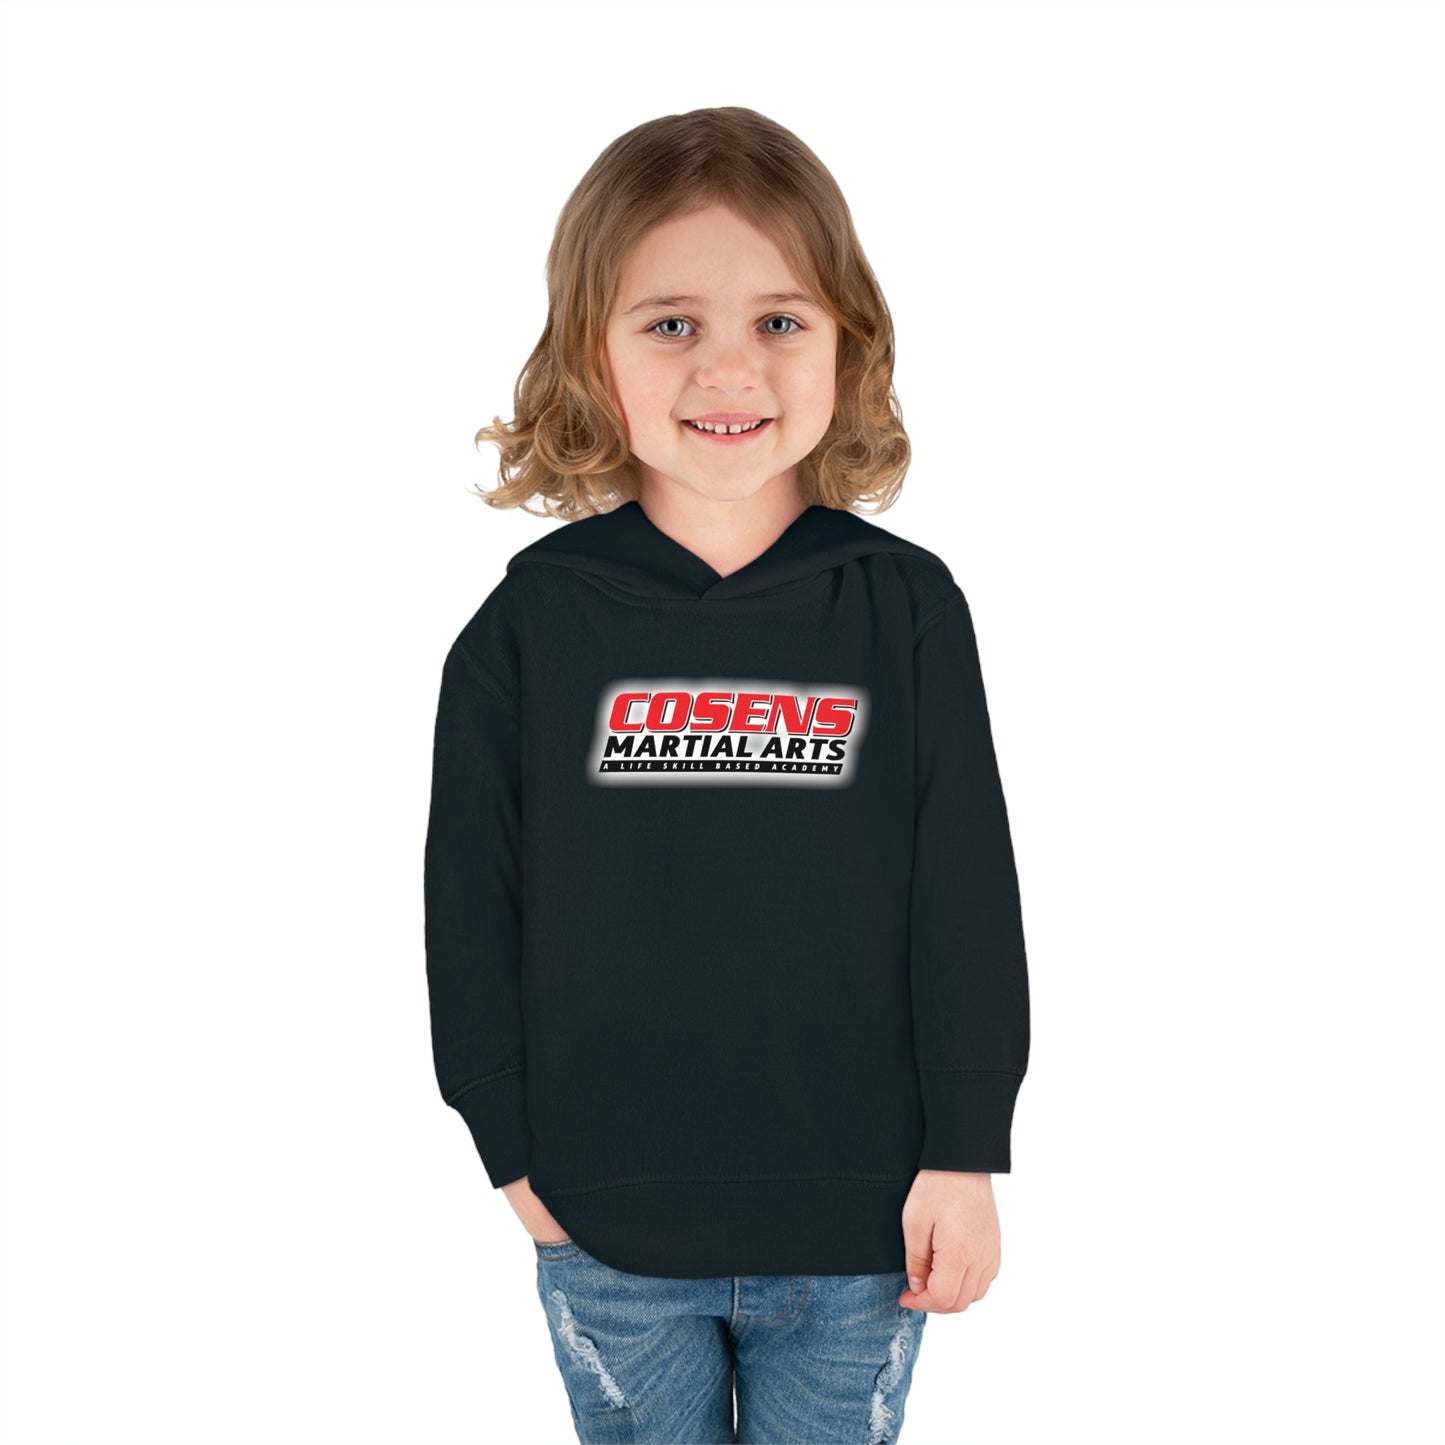 Toddler Pullover Sweatshirt (Not customized with name)